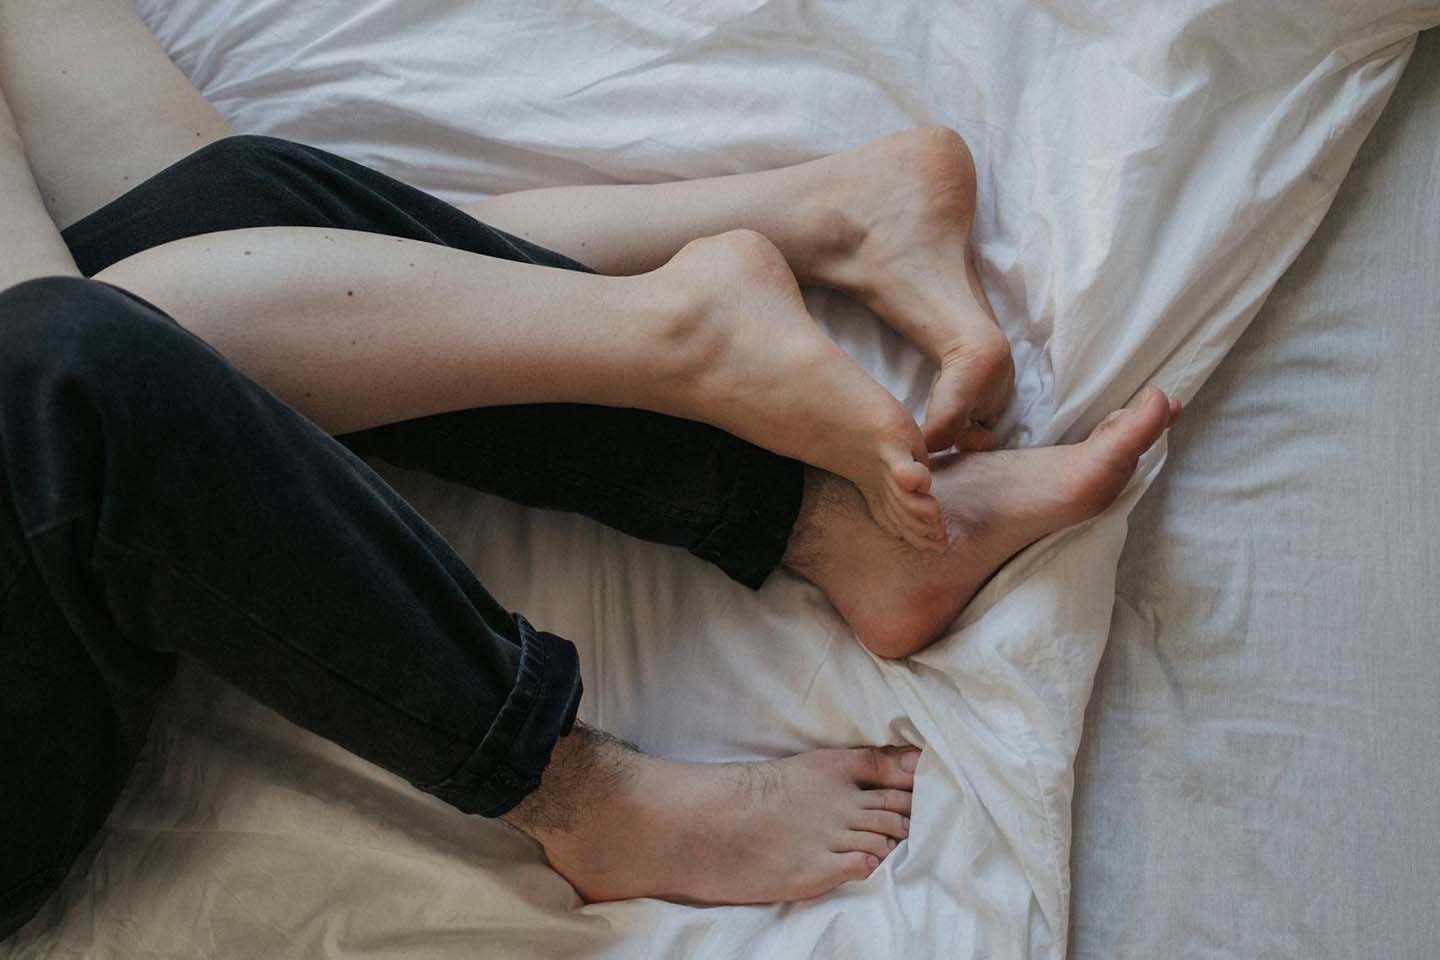 A couple's legs intertwined on a bed coming from the left side of the image. One of them is wearing pants but no socks, the other's legs are bare.